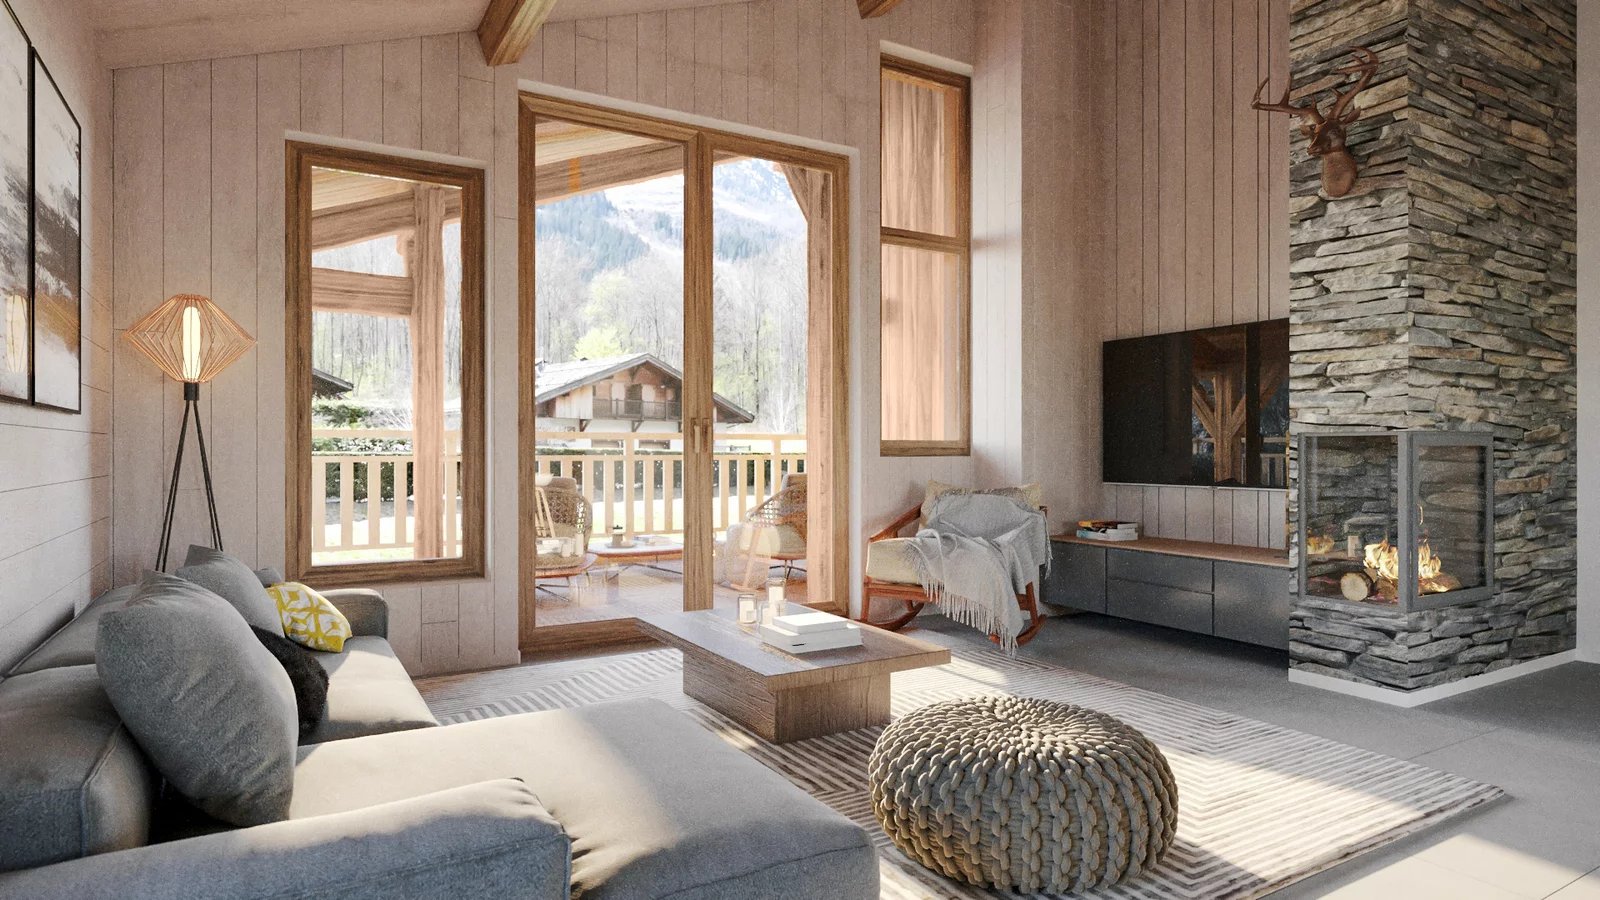 LARGE CHALET WITH MOUNTAIN VIEW